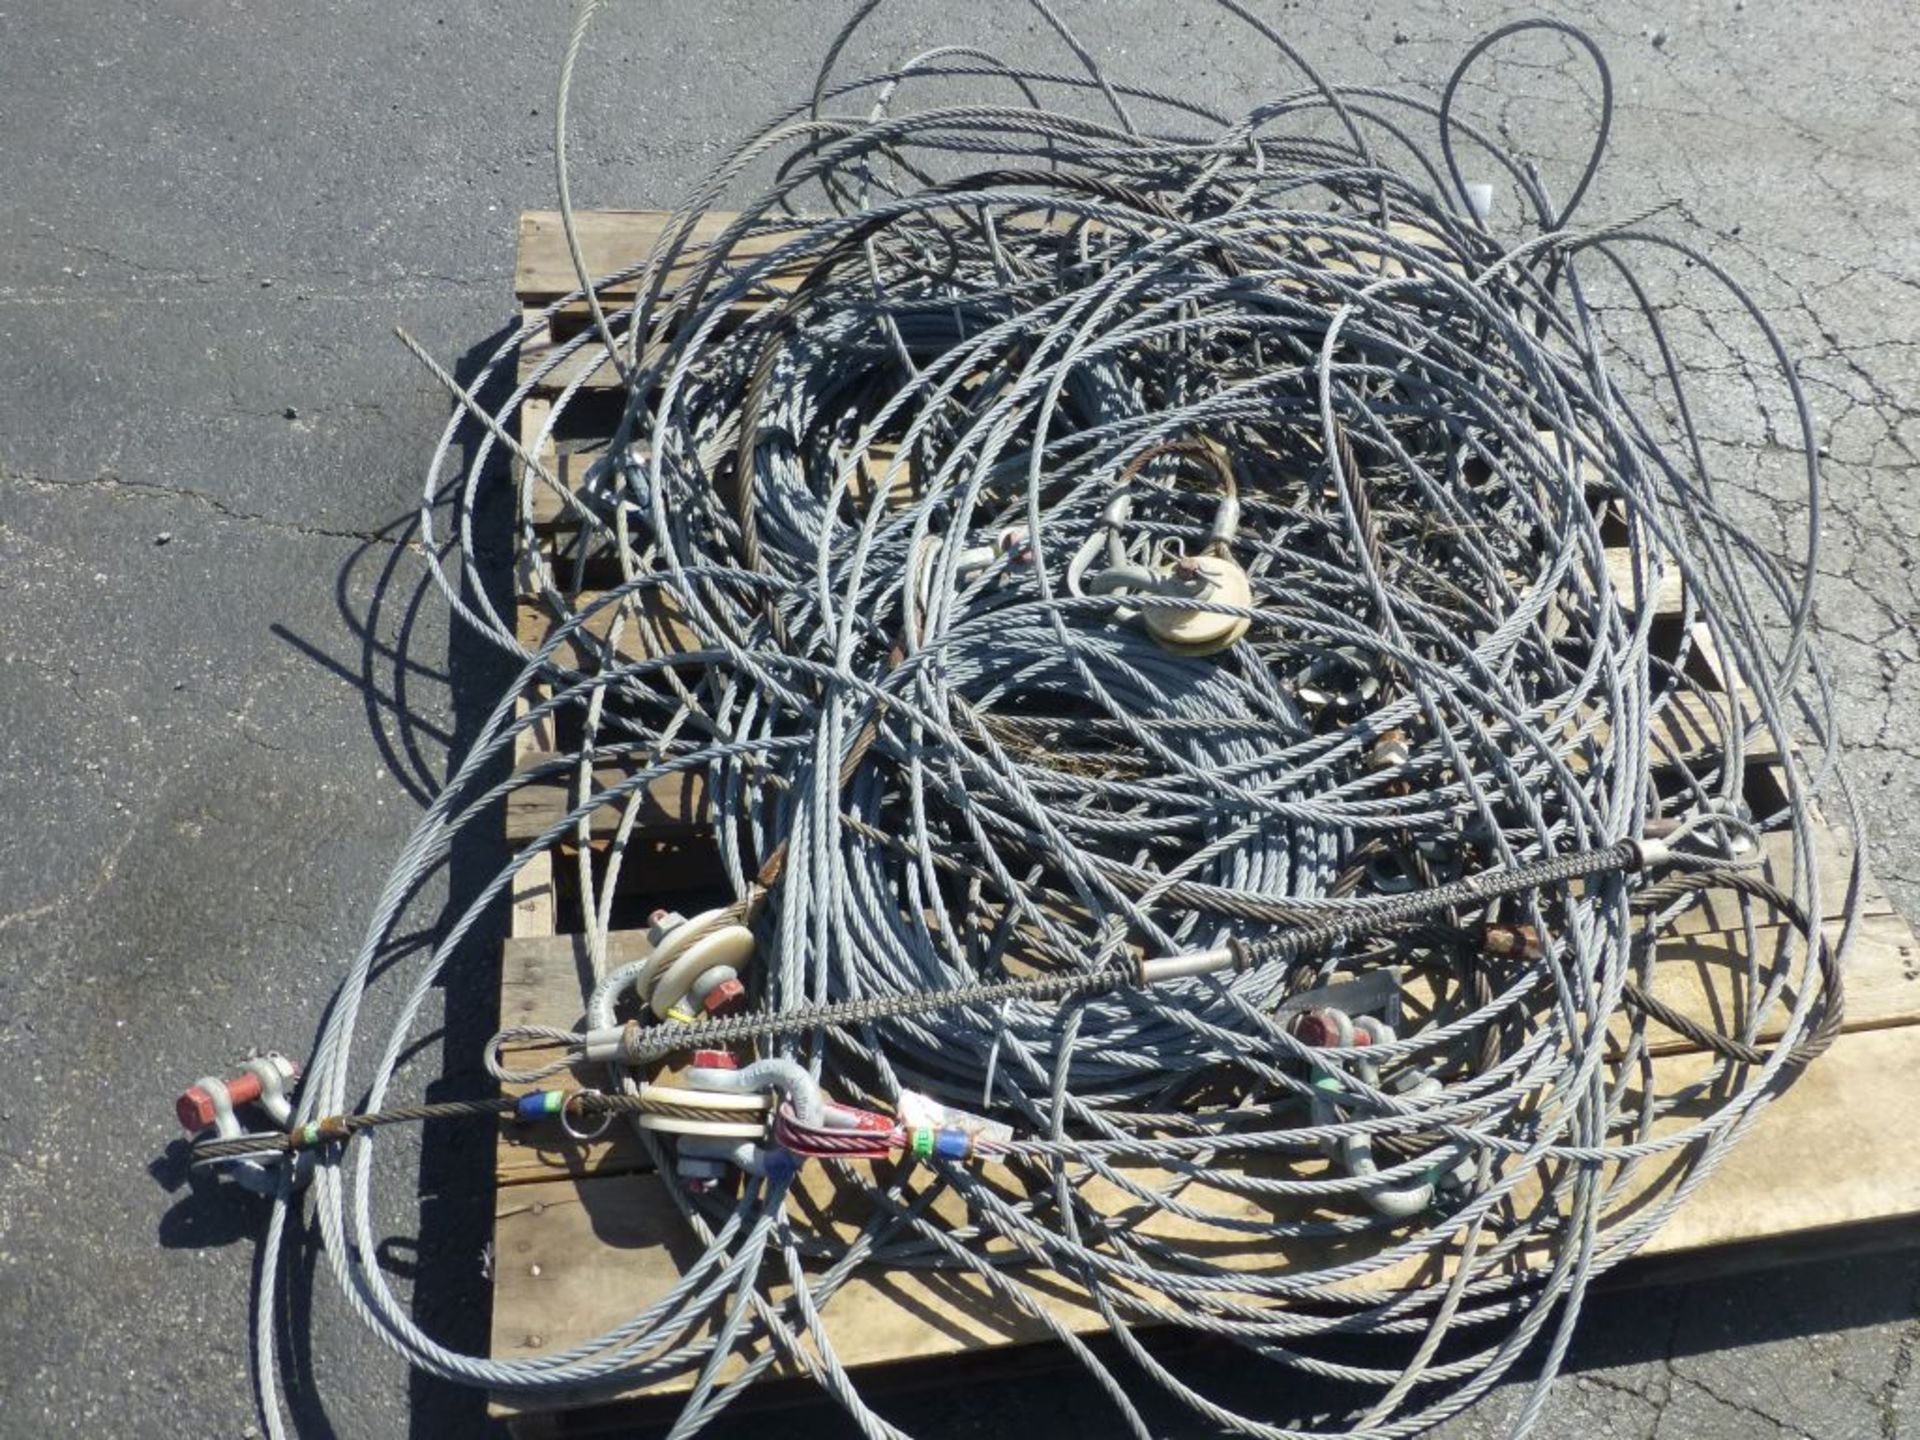 Lot of Assorted Hoist Cables - Image 3 of 8